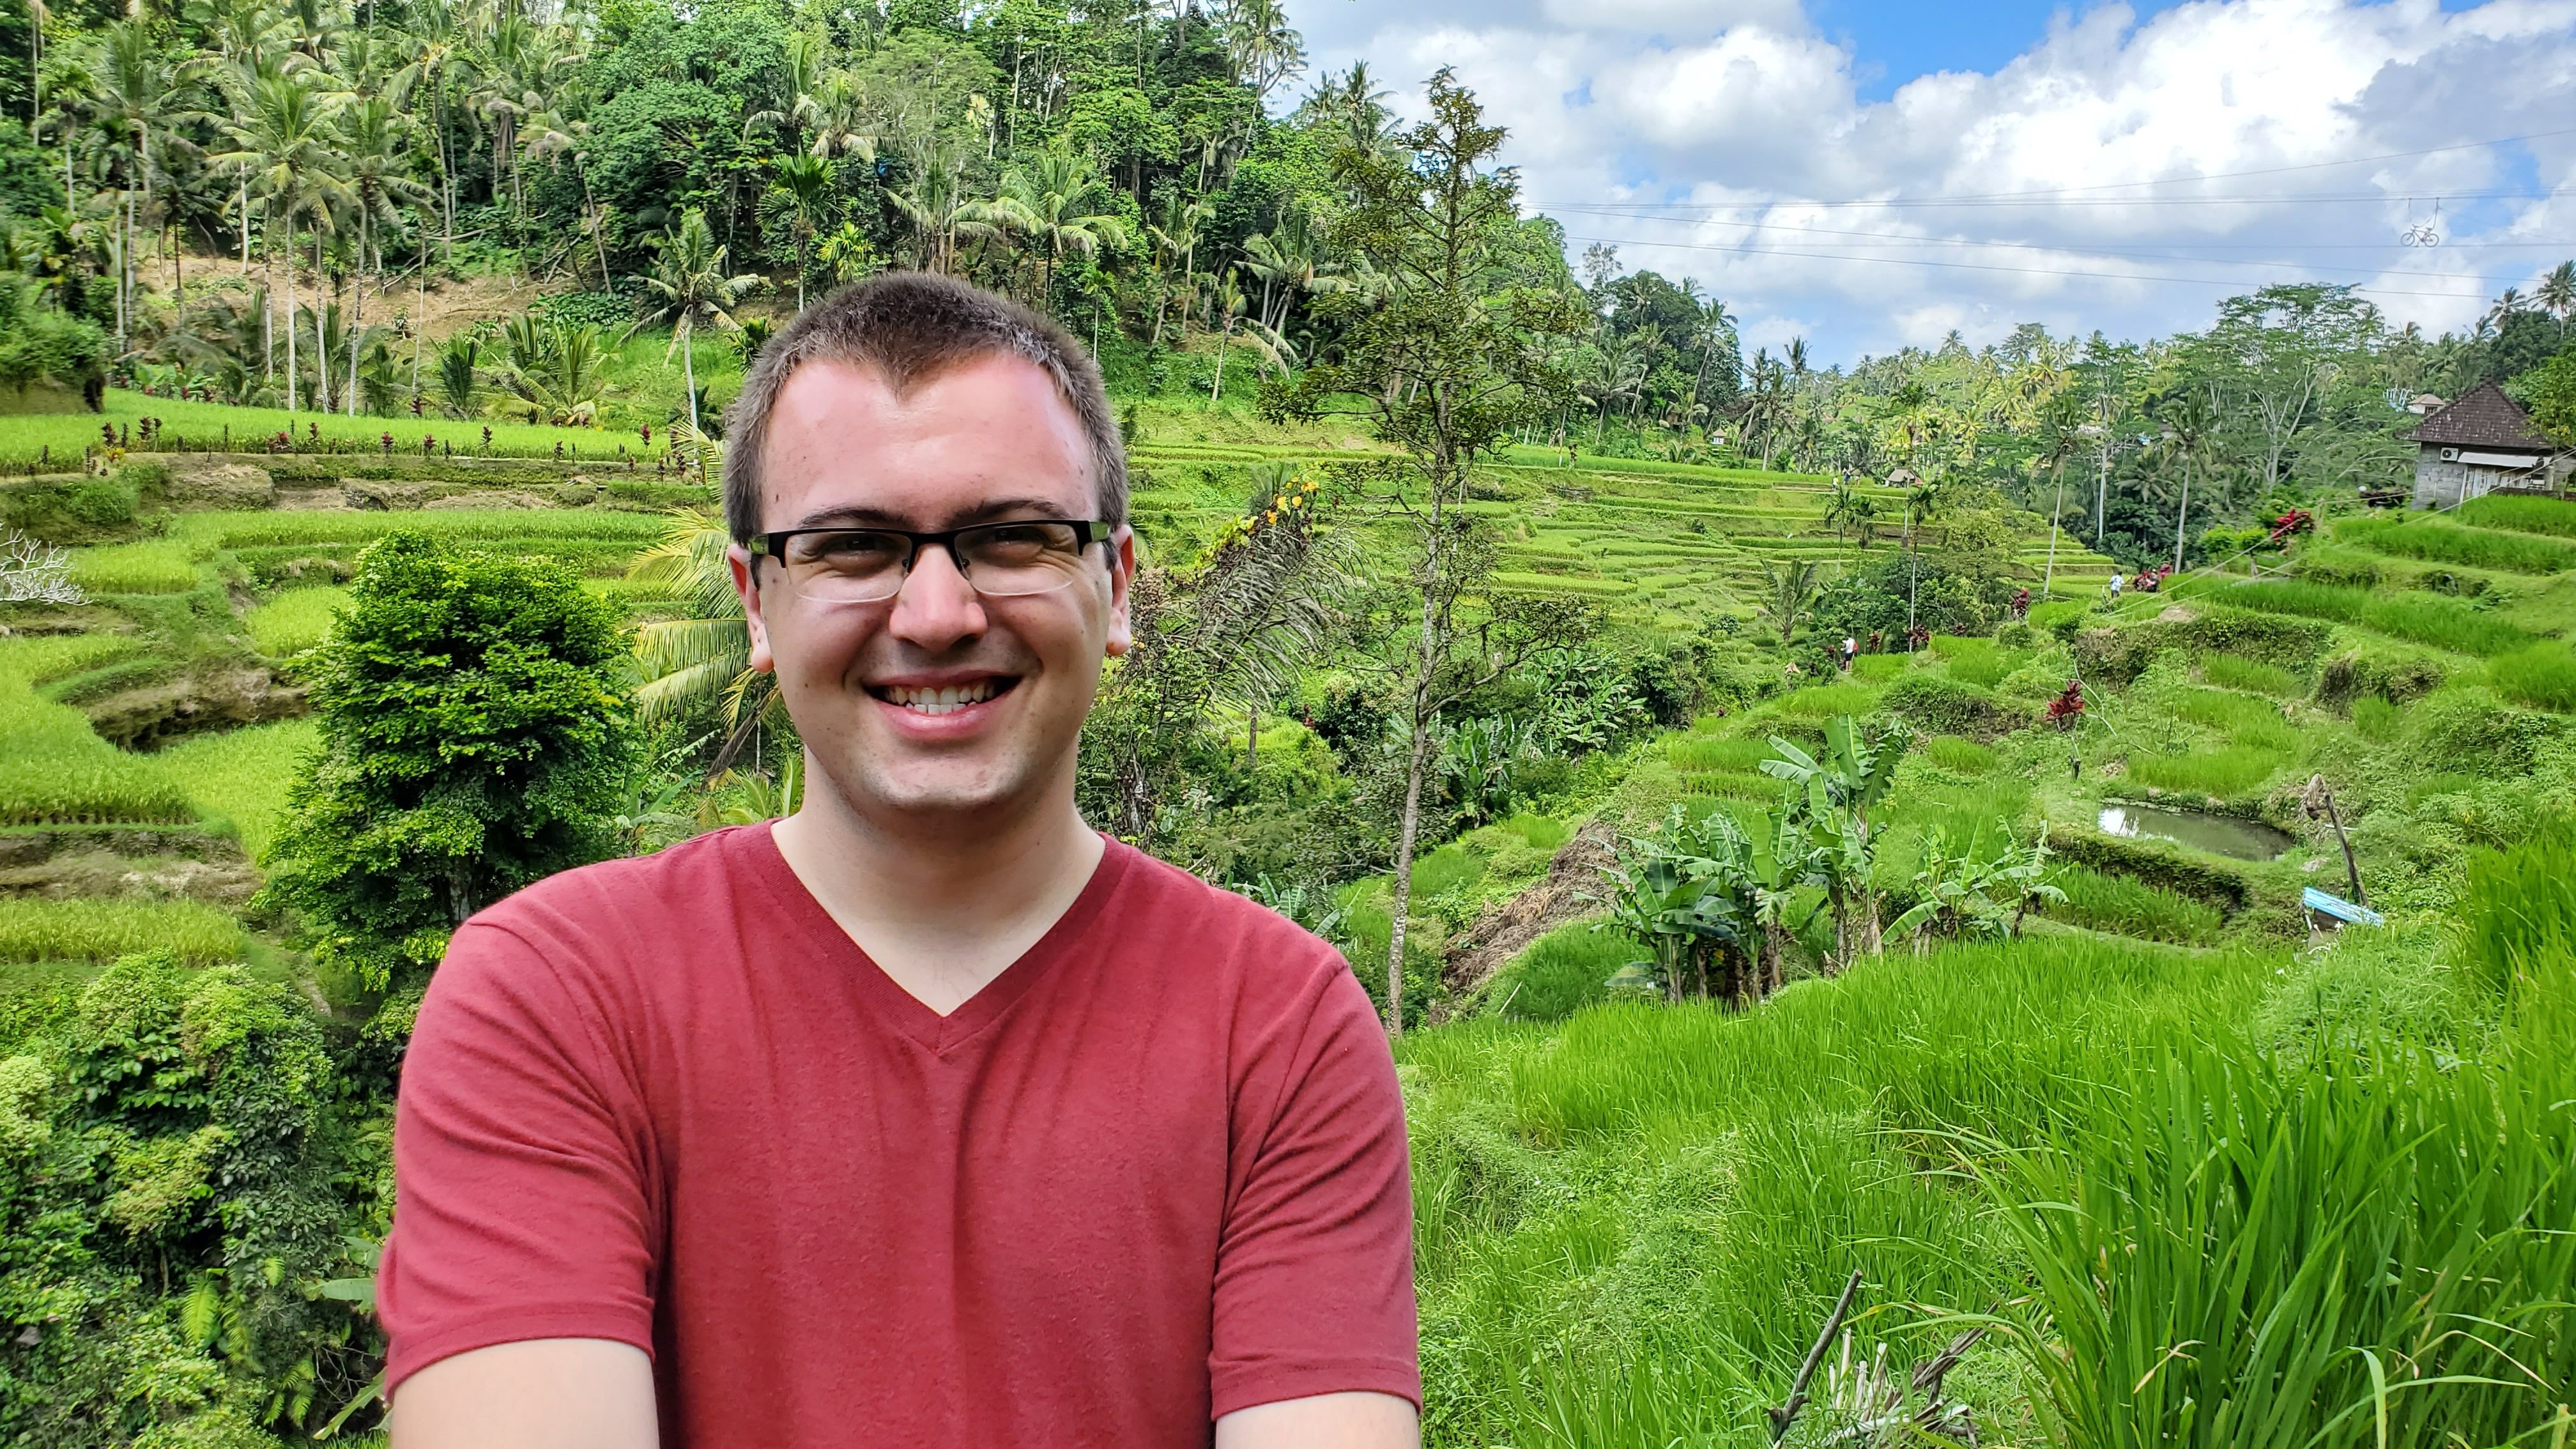 Kevin posing in front of a rice paddie field in Bali. 